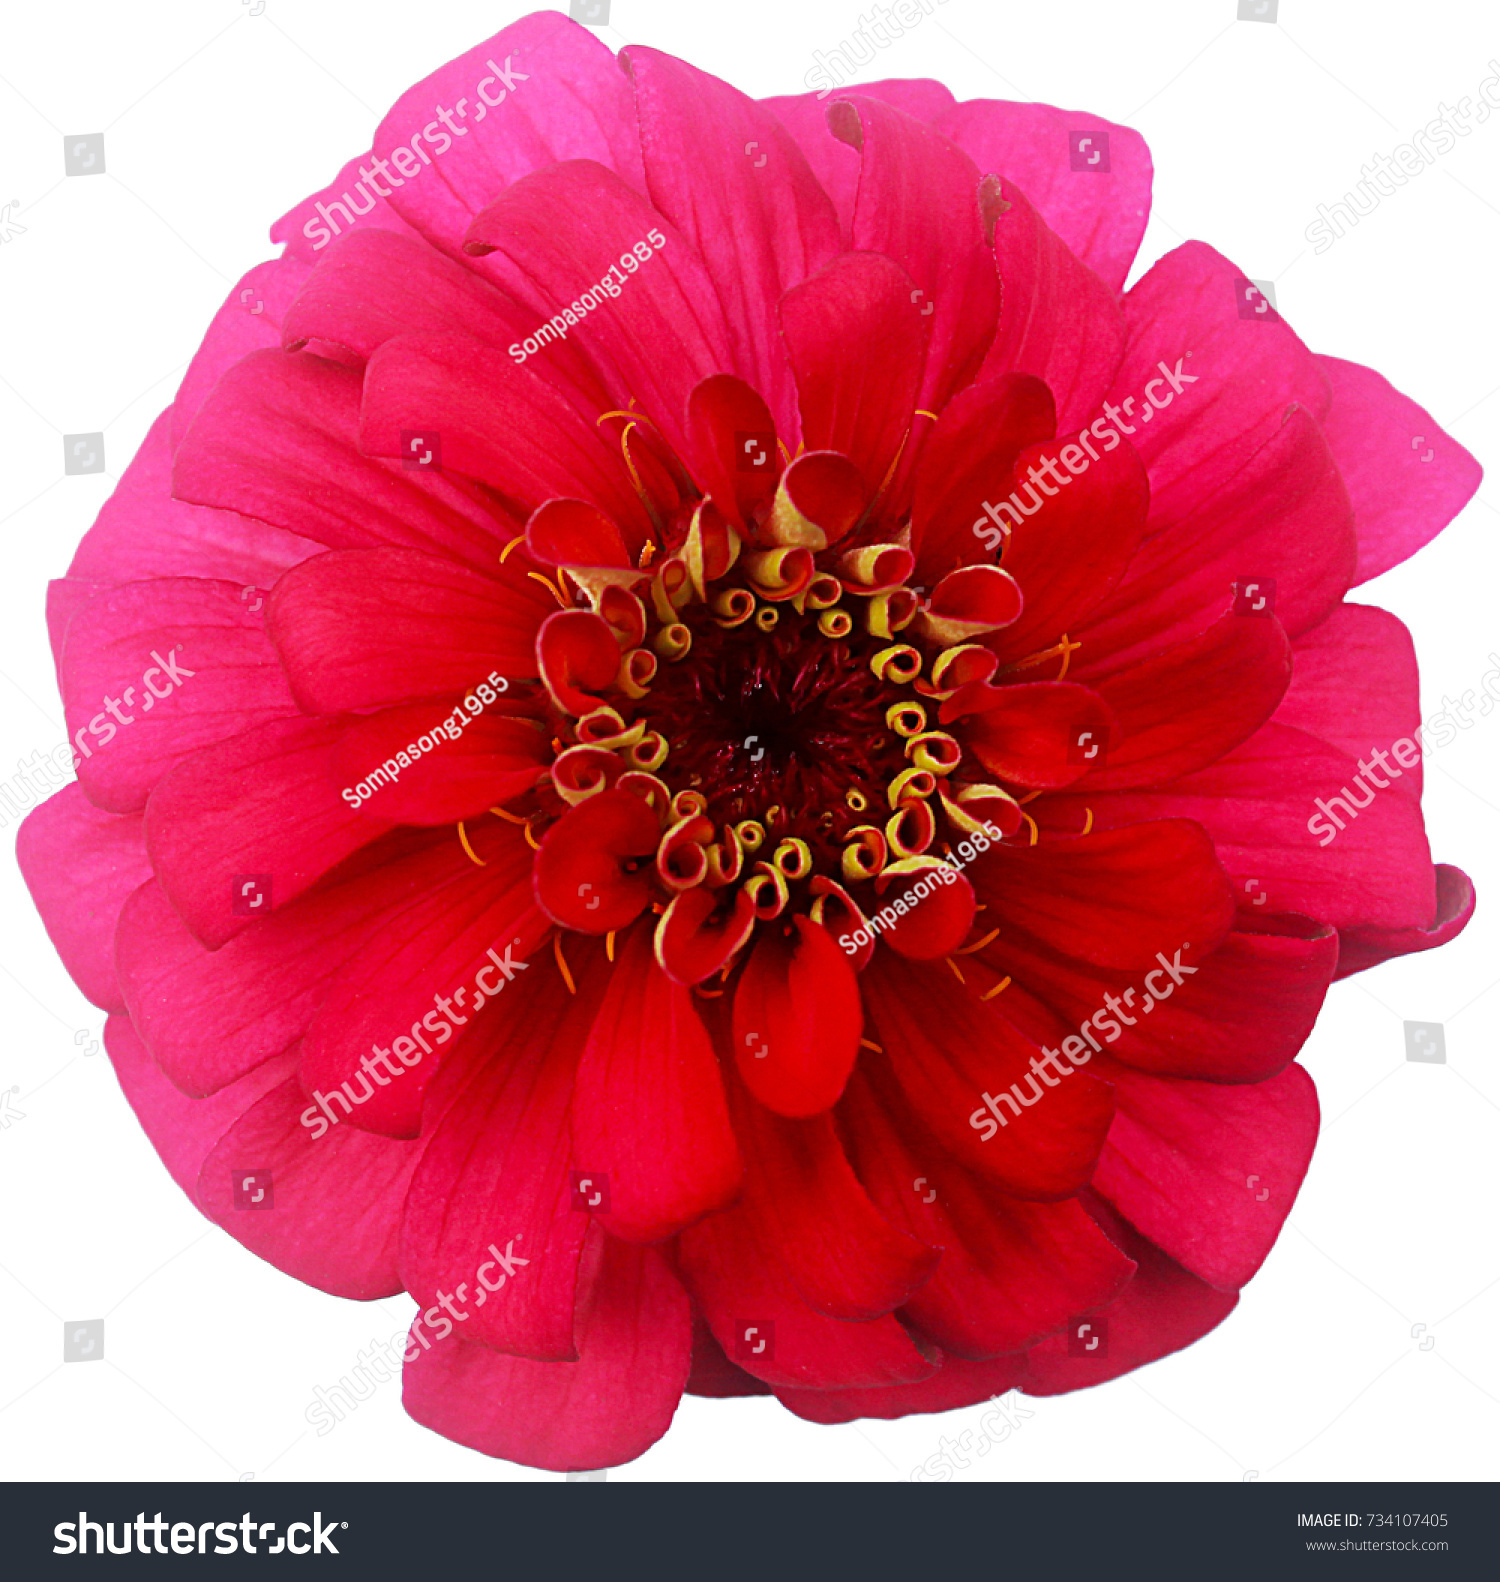 Red Flower Isolated On White Background Stock Photo (Edit Now ...